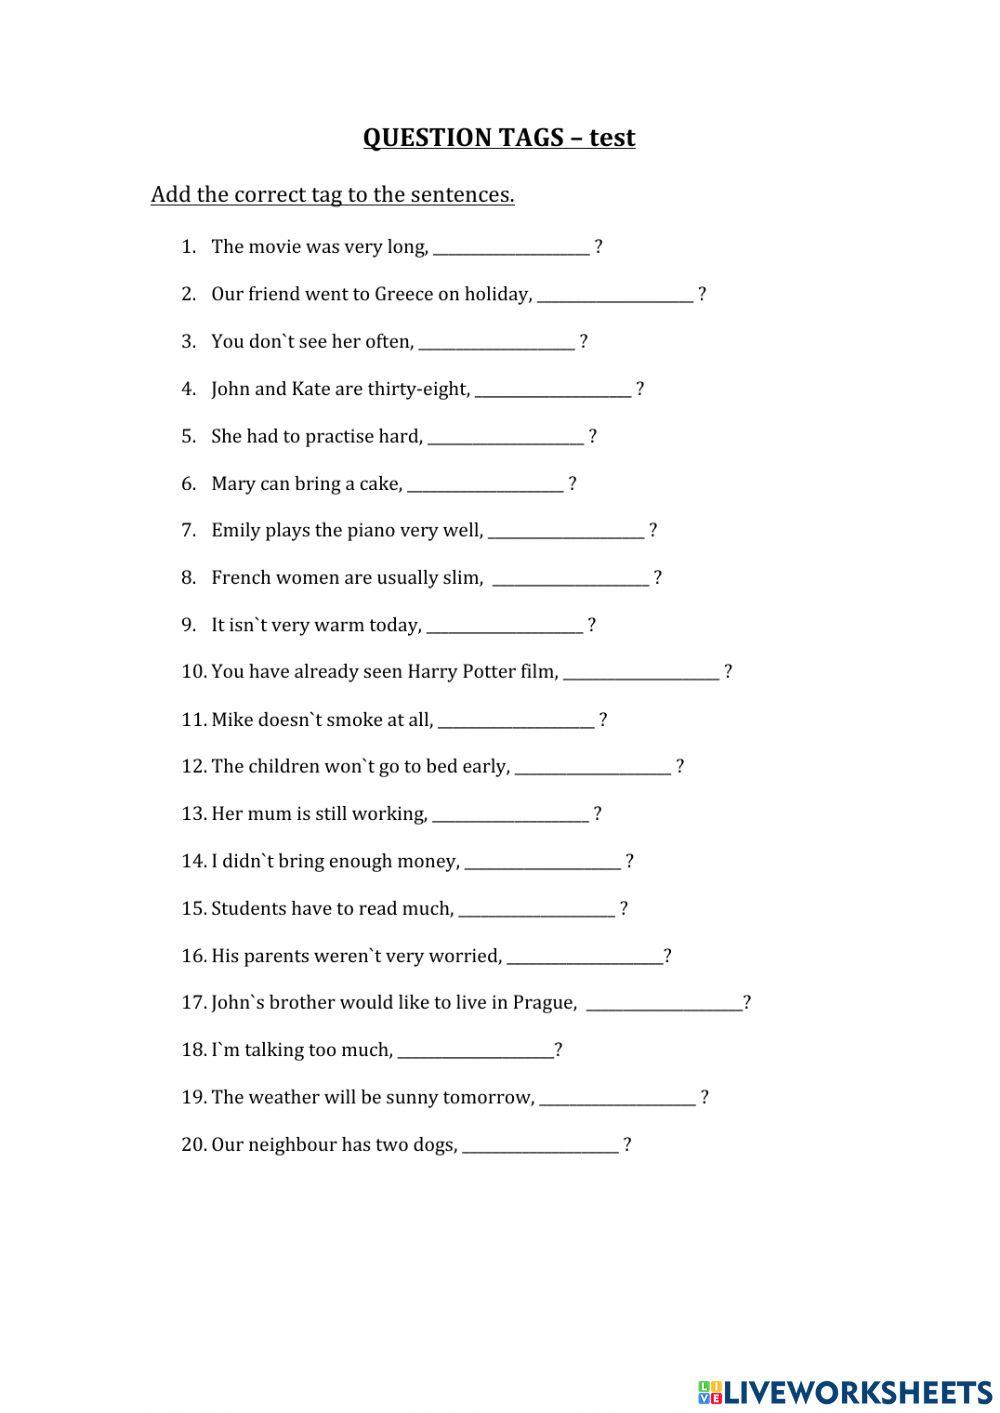 Question tags interactive exercise for Grade 8 | Live Worksheets